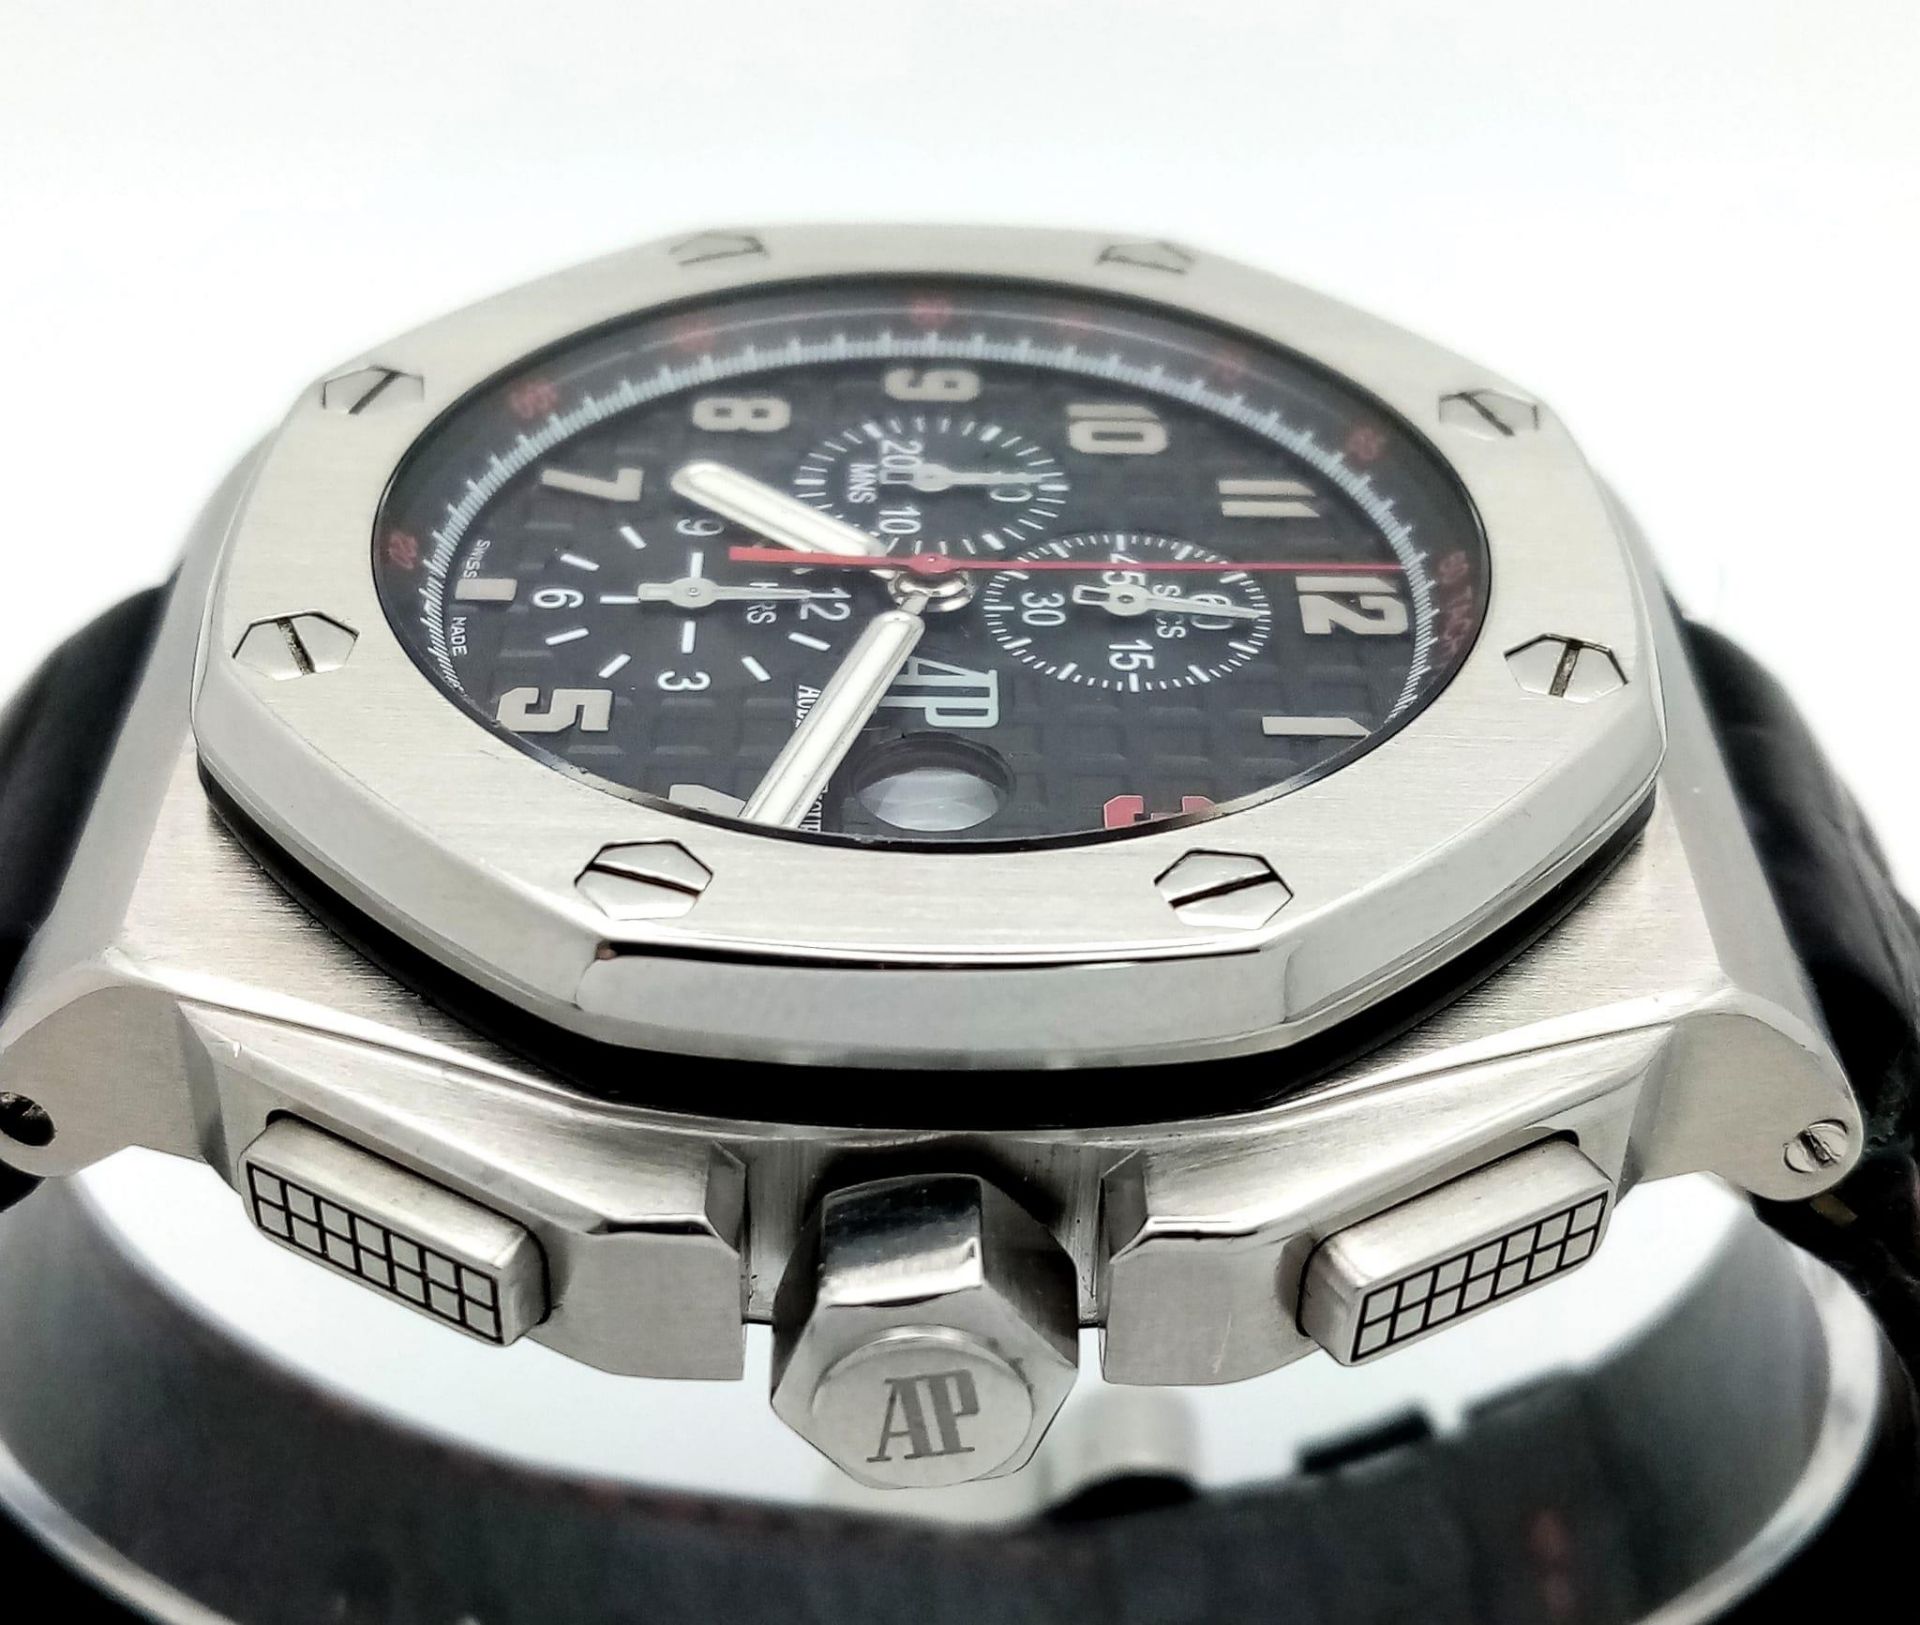 A Rare Limited Edition Audemars Piguet Royal Oak Offshore, Shaquille O'Neal Gents Chronograph Watch. - Image 3 of 6